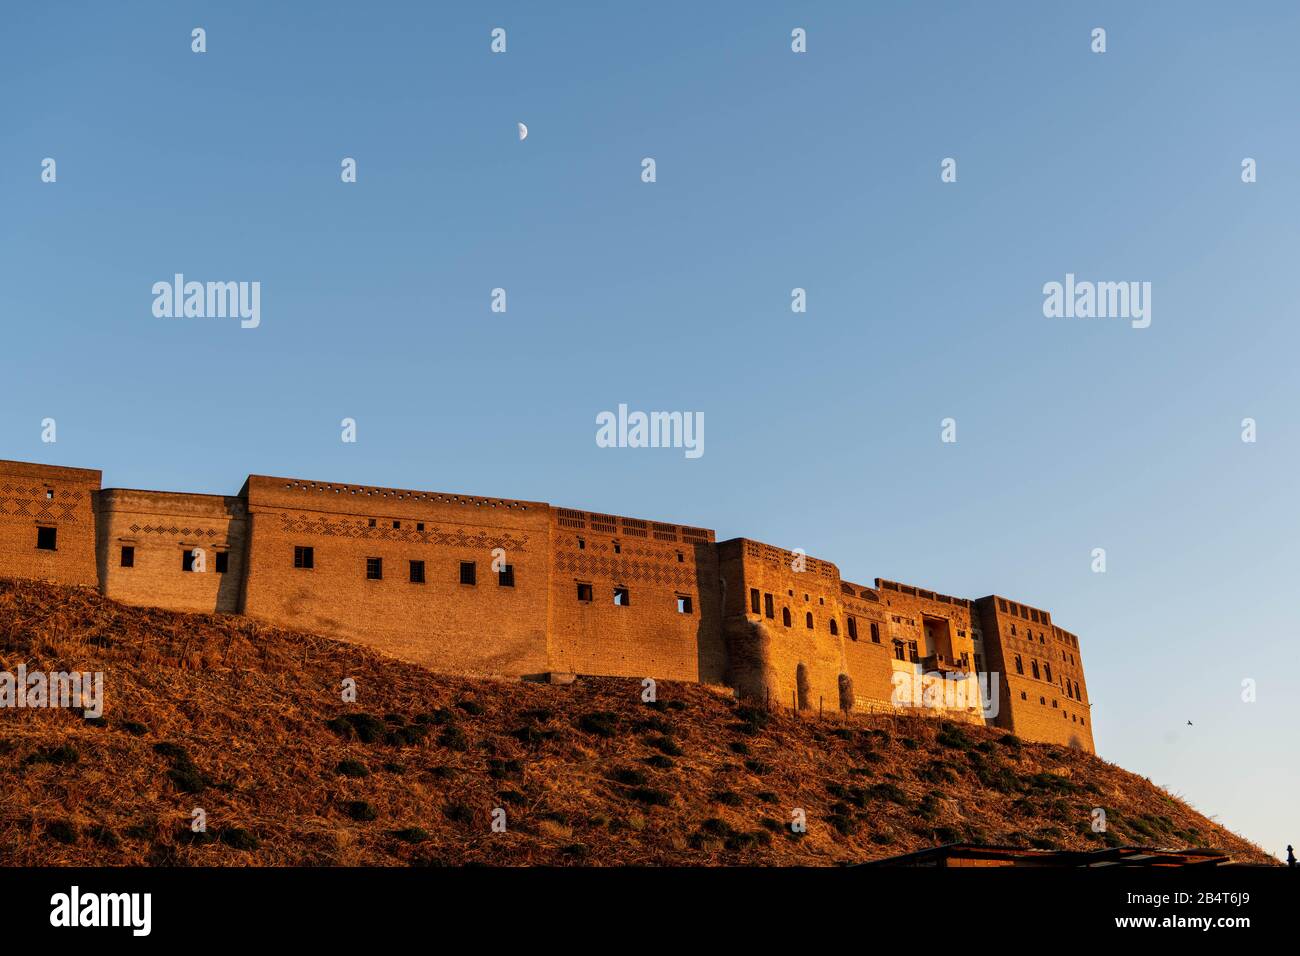 Iraq, Iraqi Kurdistan, Arbil, Erbil. View of the Qalat citadel at sunset. Birds are flying in the background and the moon is shining. Stock Photo